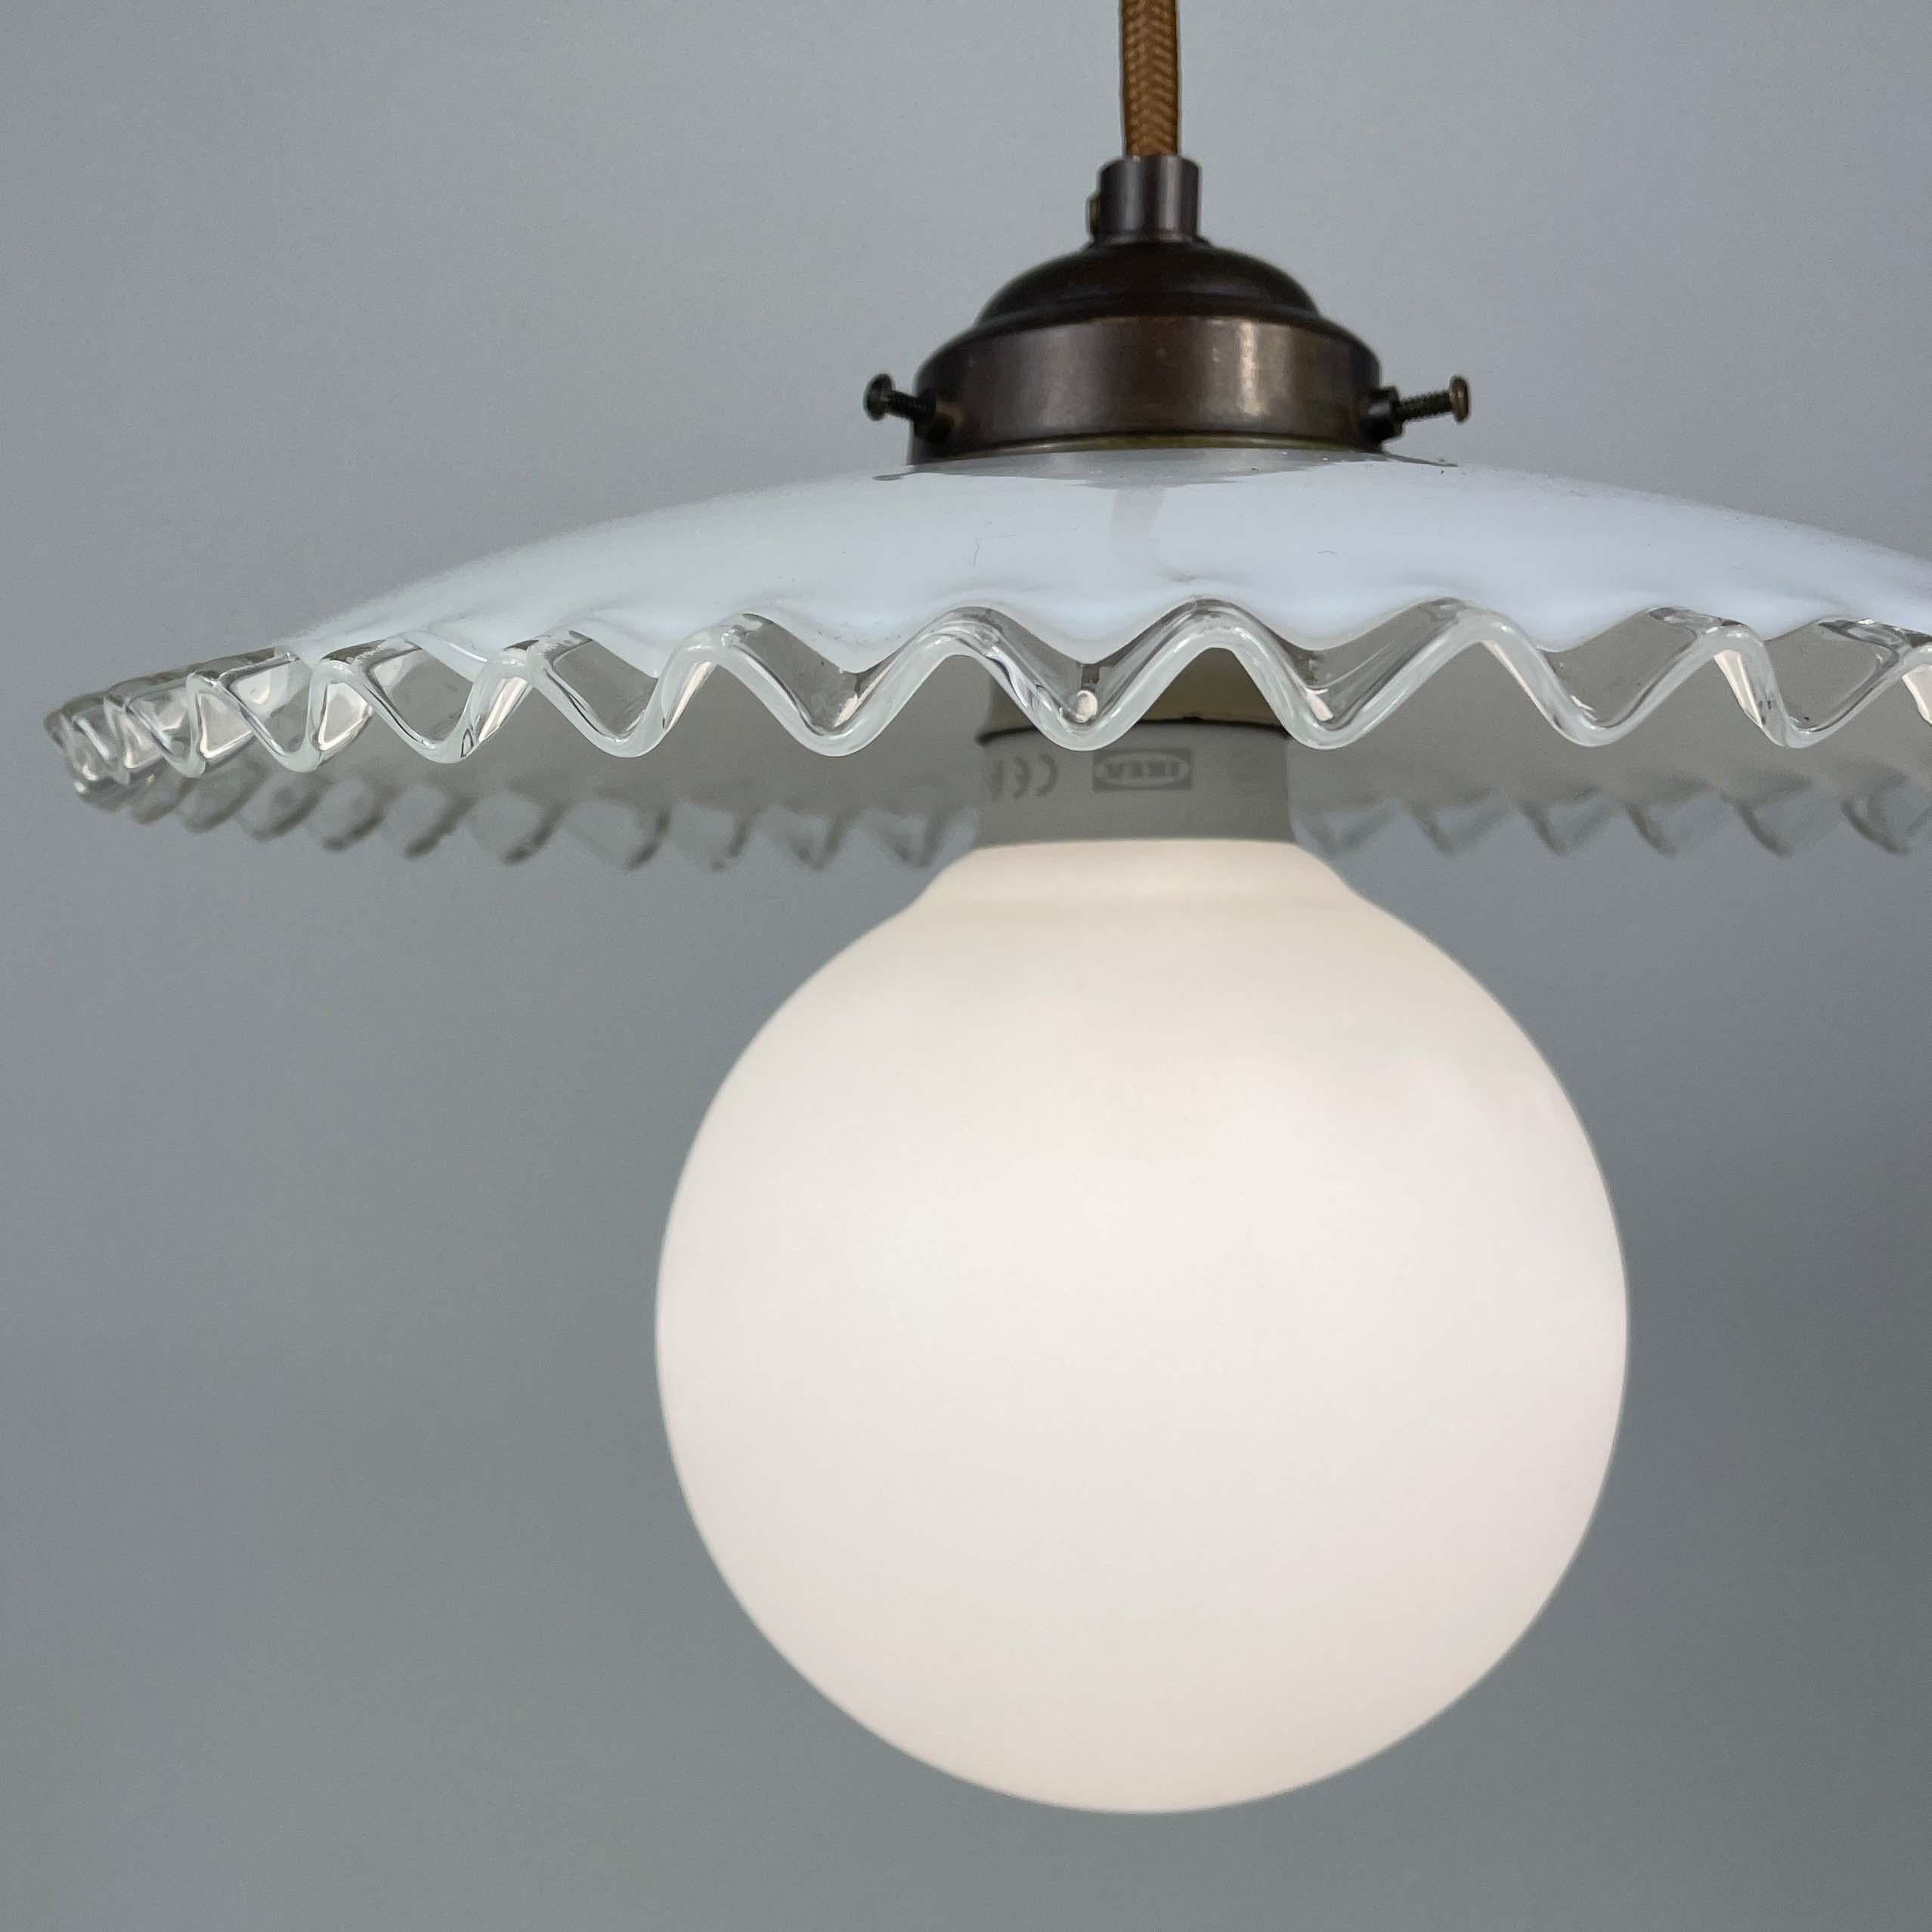 Midcentury French Opaline Glass Pendant Light, 1950s For Sale 1